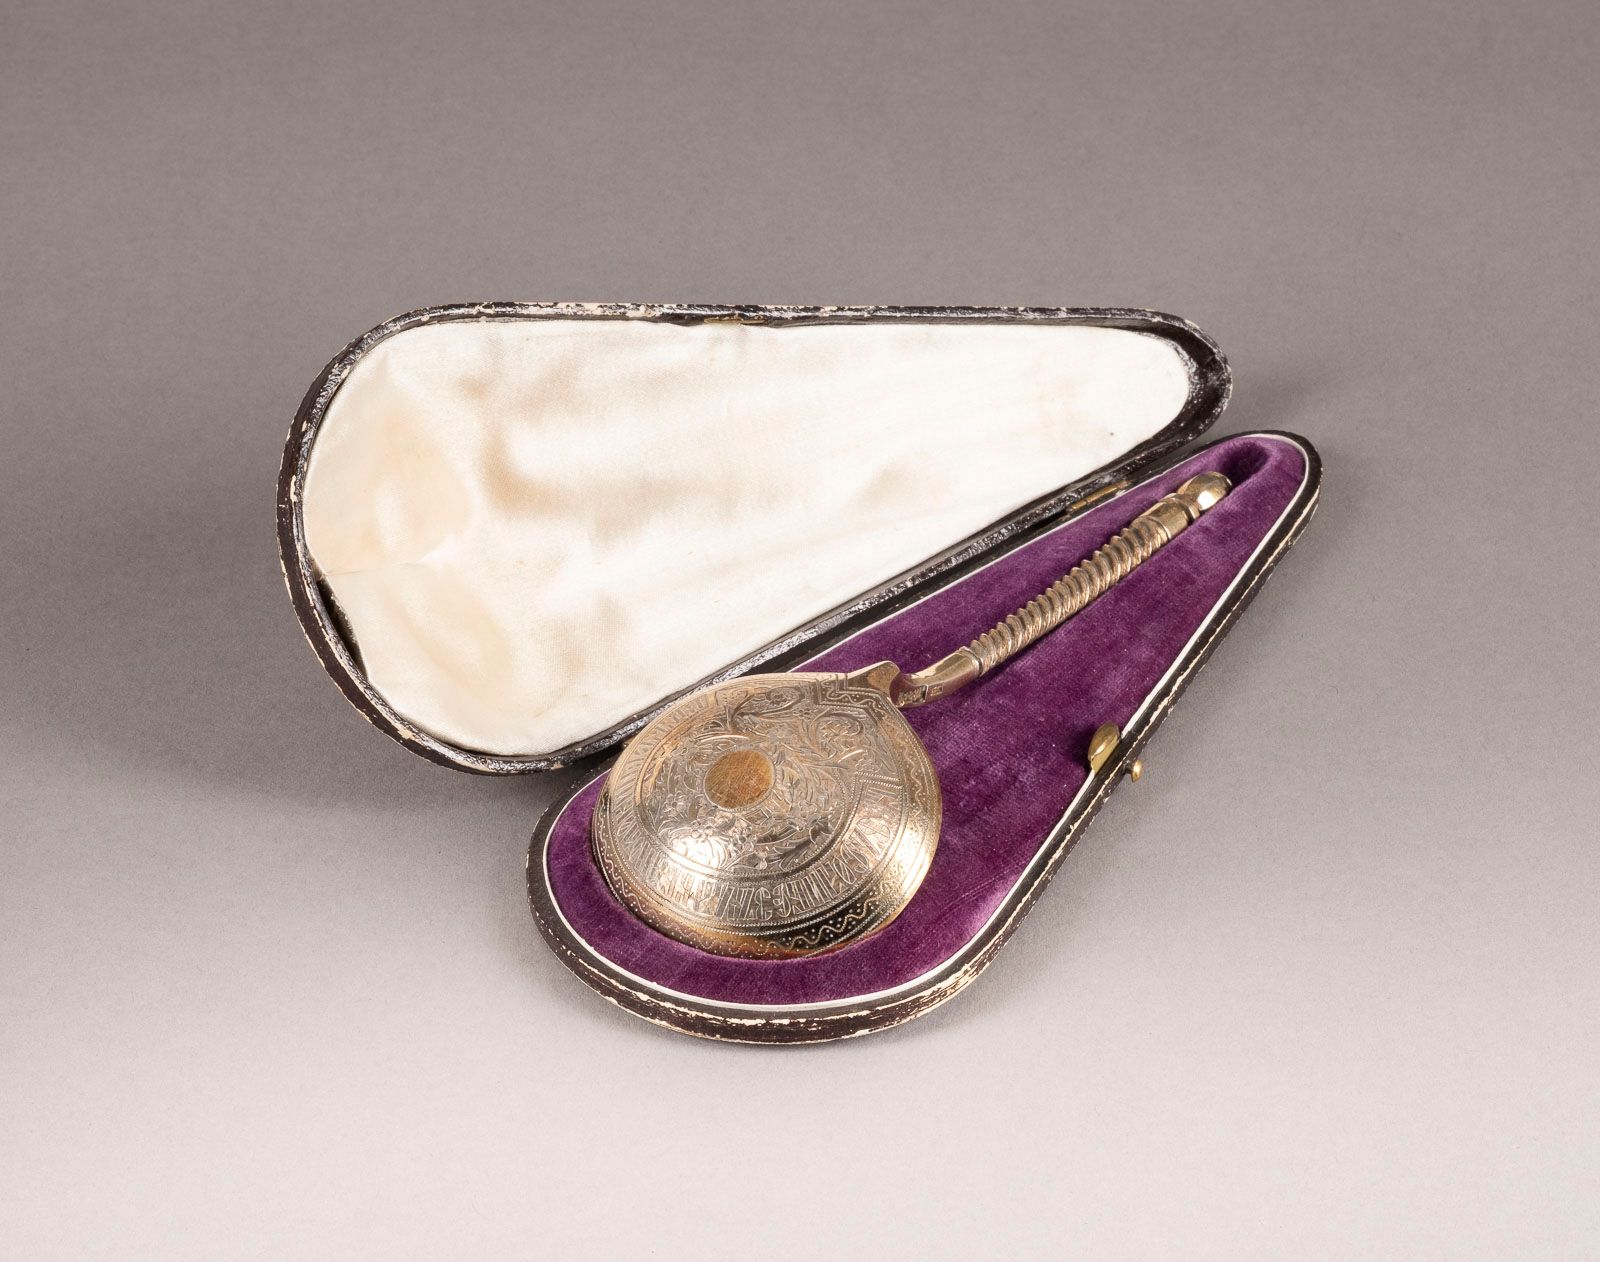 A LARGE SILVER-GILT SPOON WITHIN ORIGINAL FITTED CASE GRANDE SPOCHE EN ARGENT-GI&hellip;